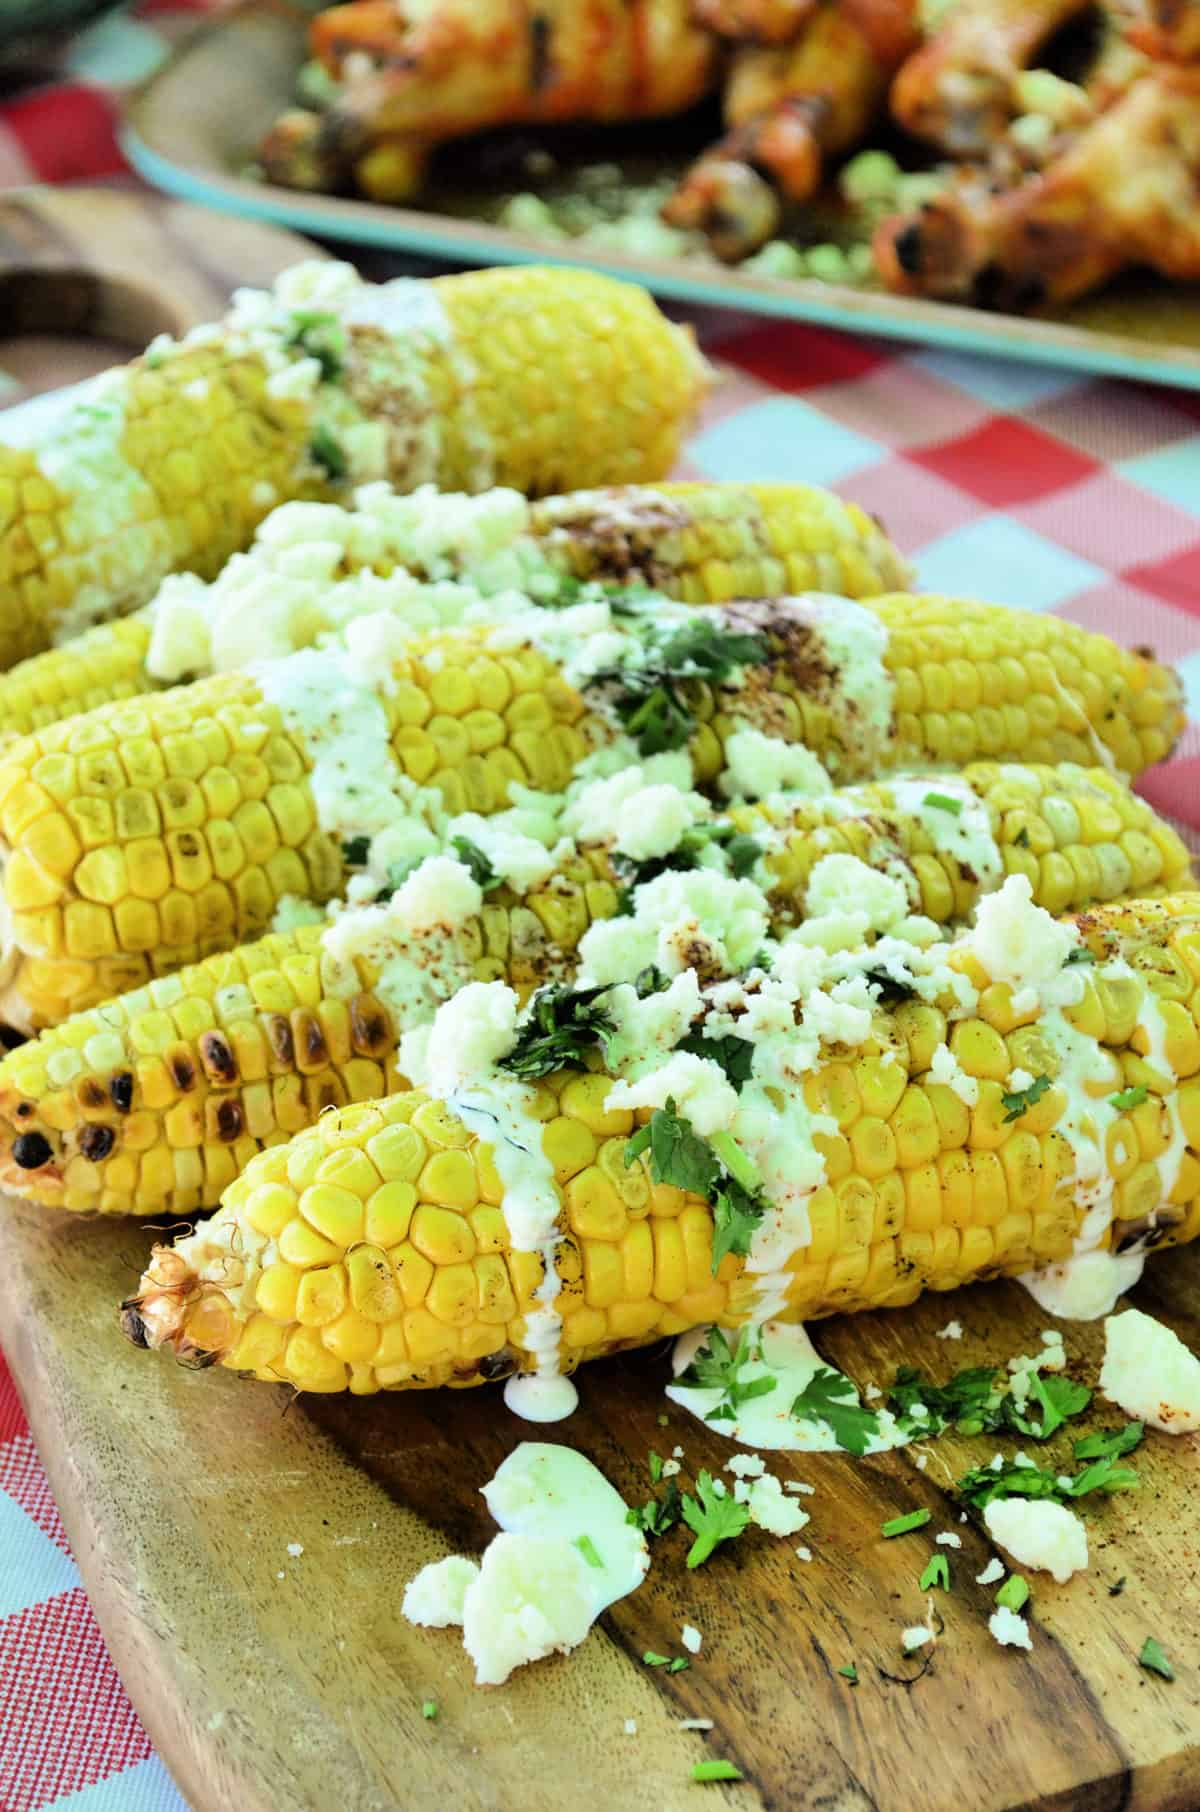 corn cobs on a board drizzled with crema, cheese crumbles, red powder, and herbs.